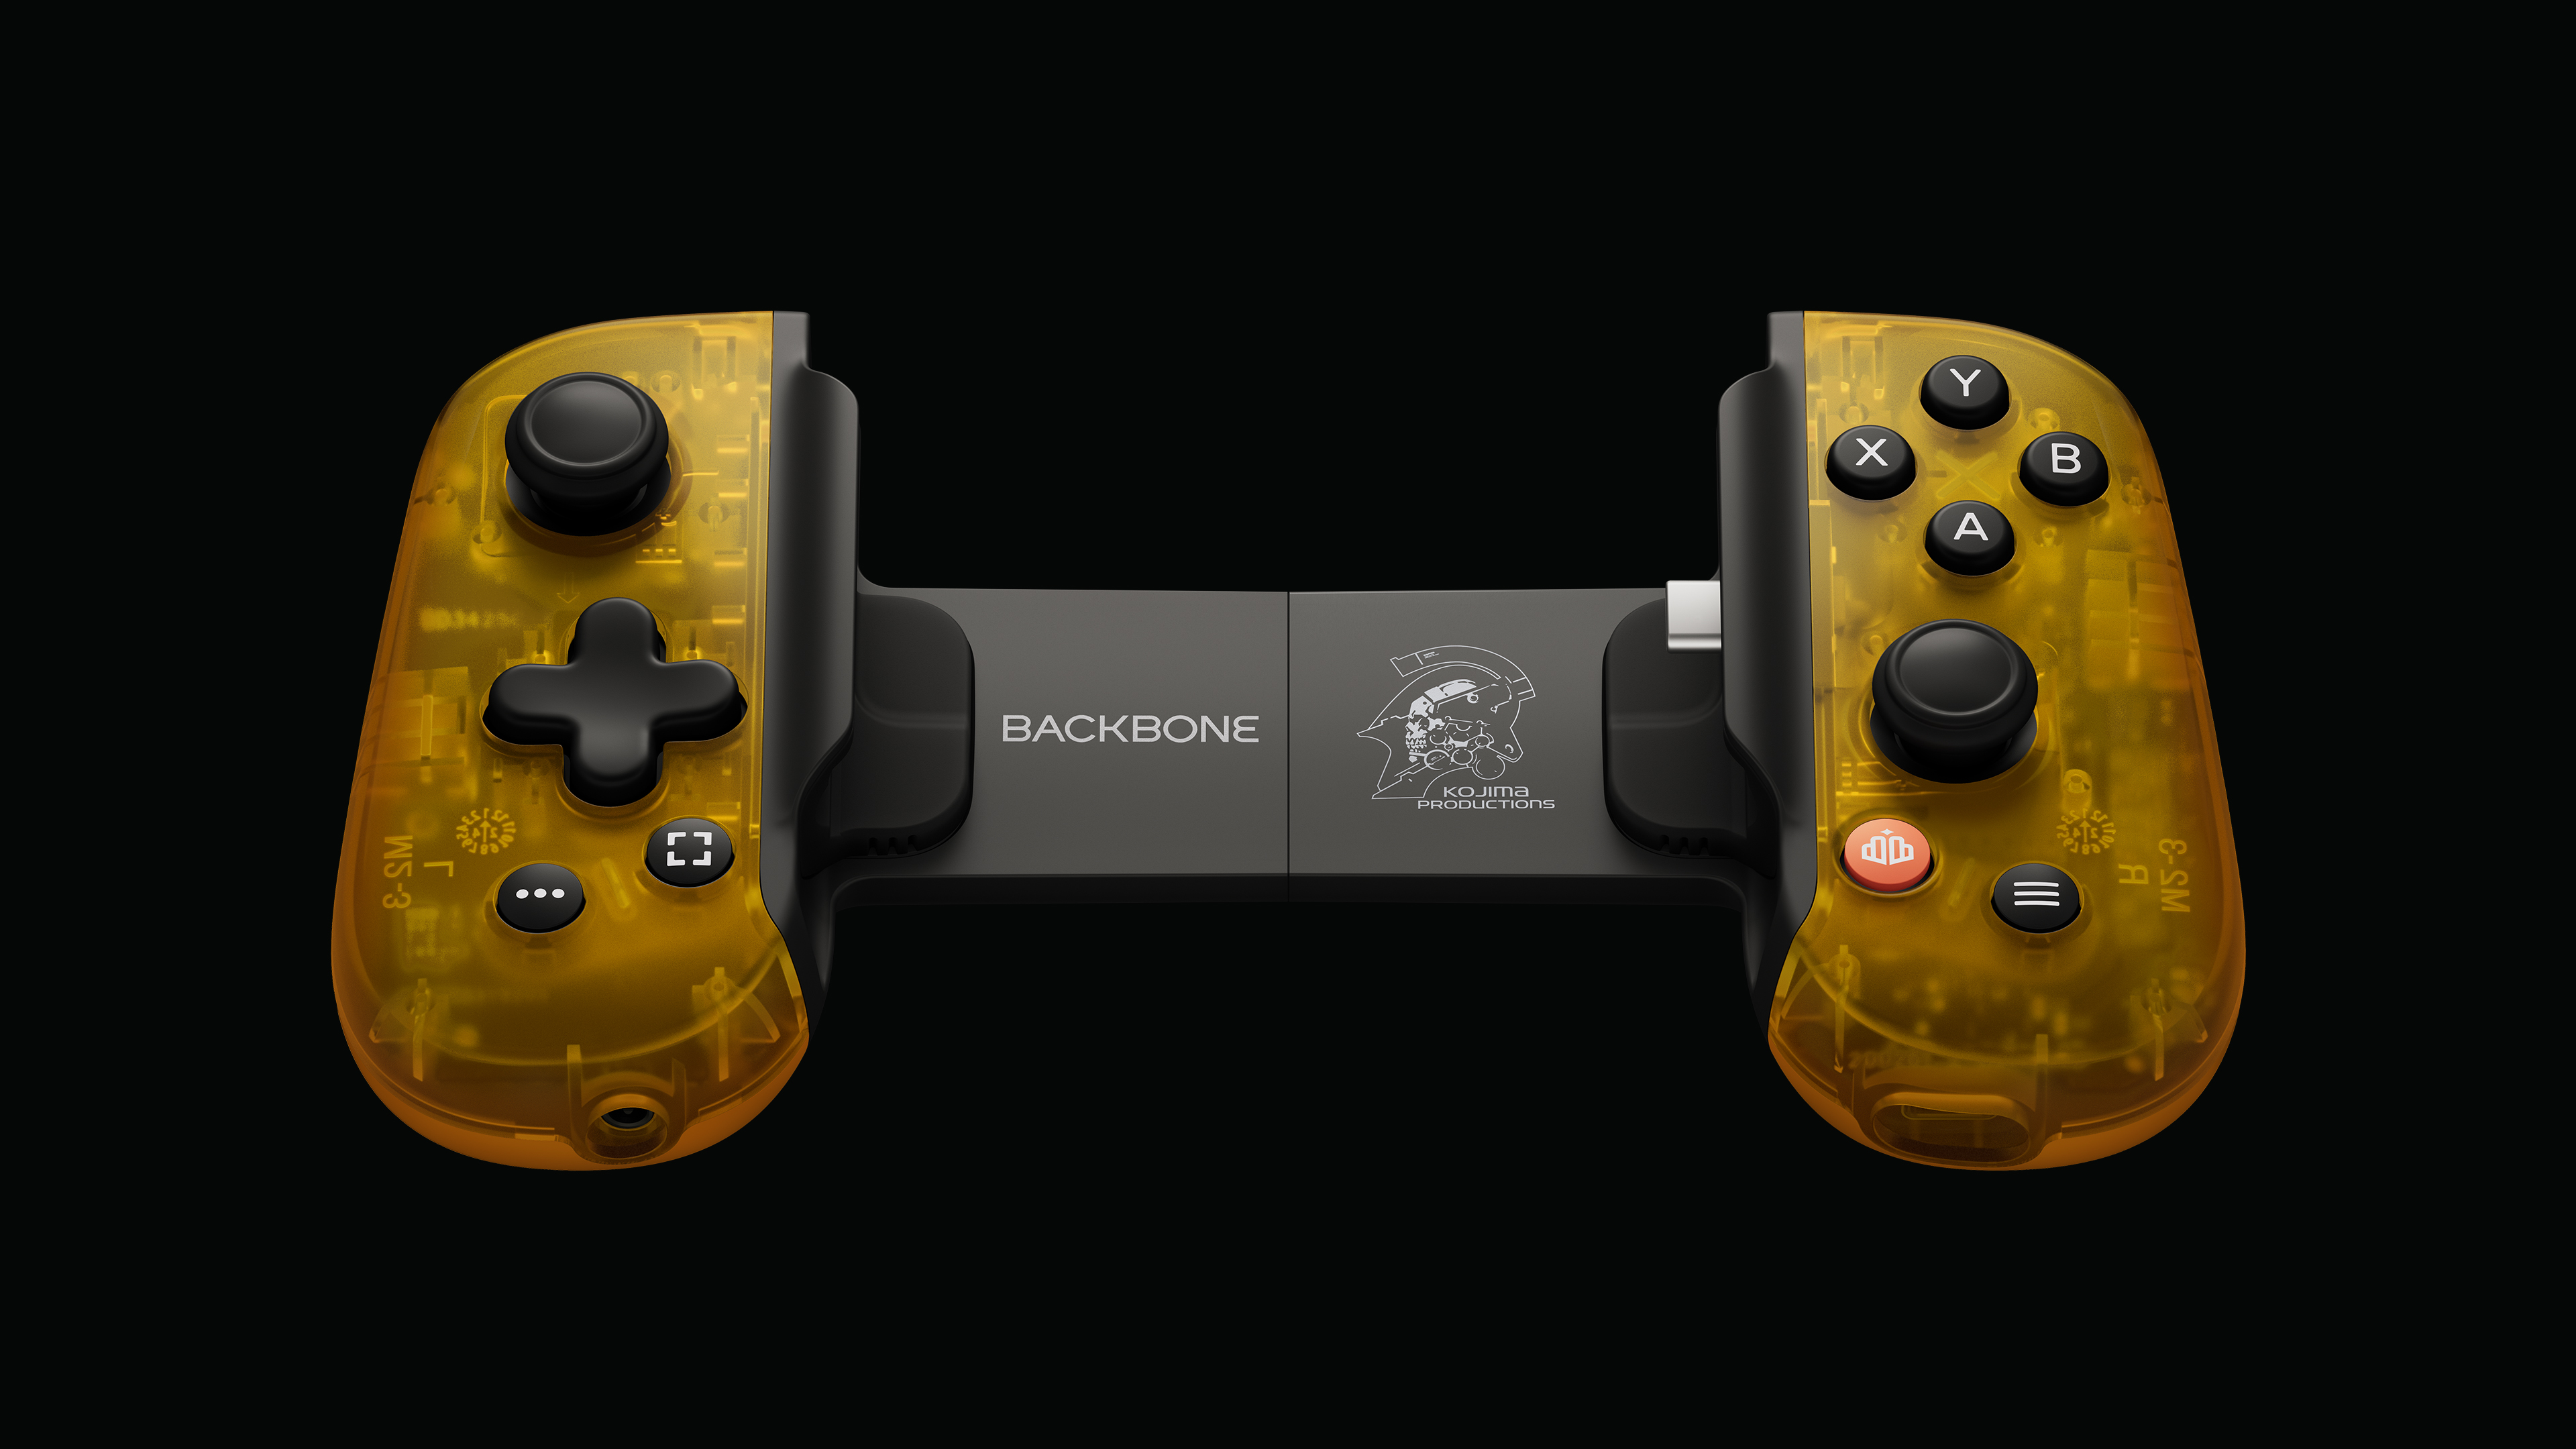 Backbone One Controller for Android for sale online